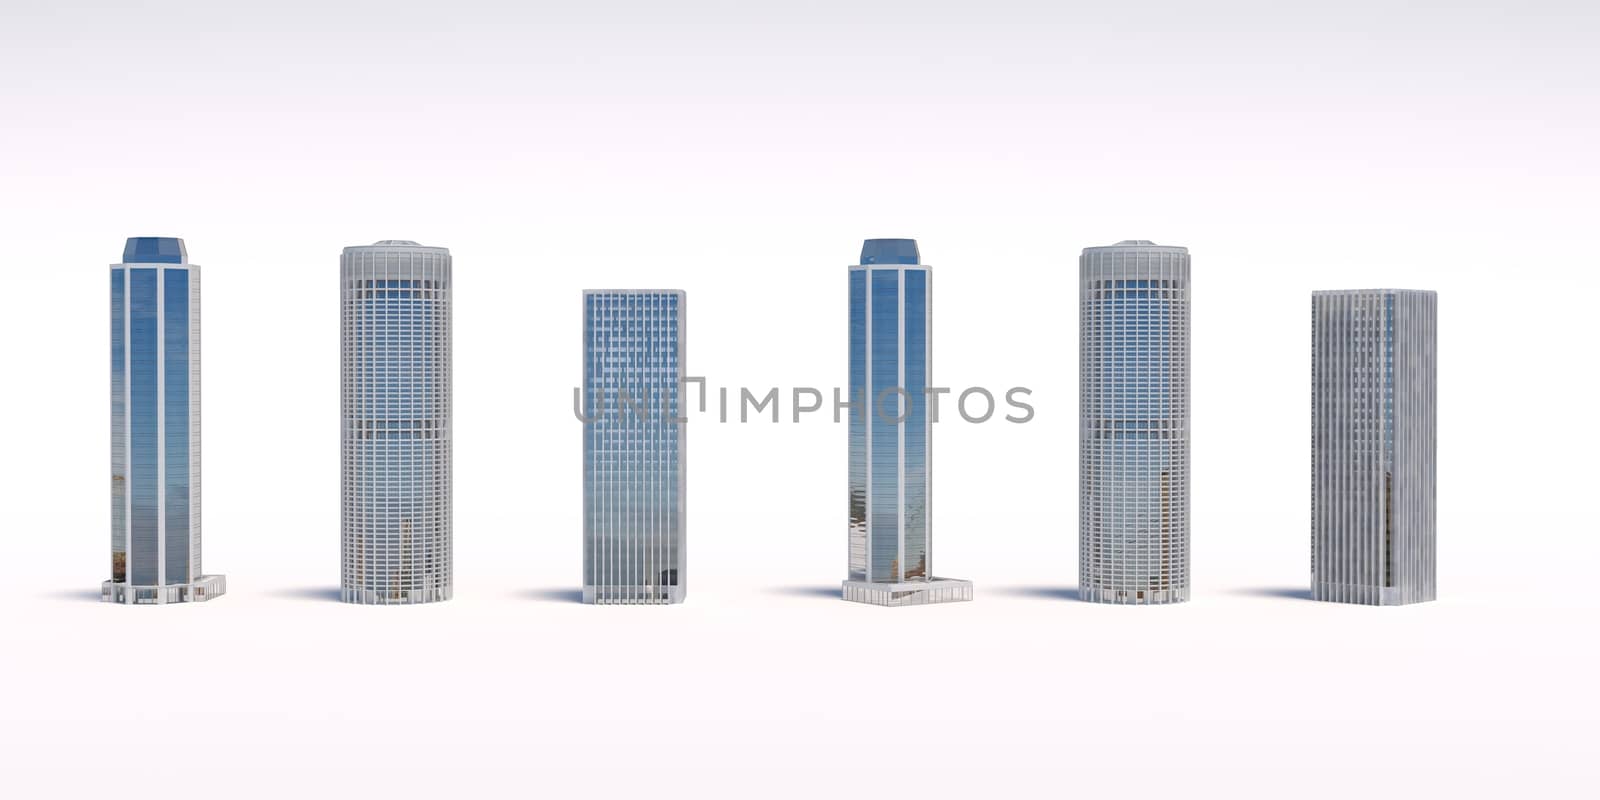 Set of different skyscraper buildings isolated on white. 3d illustration.